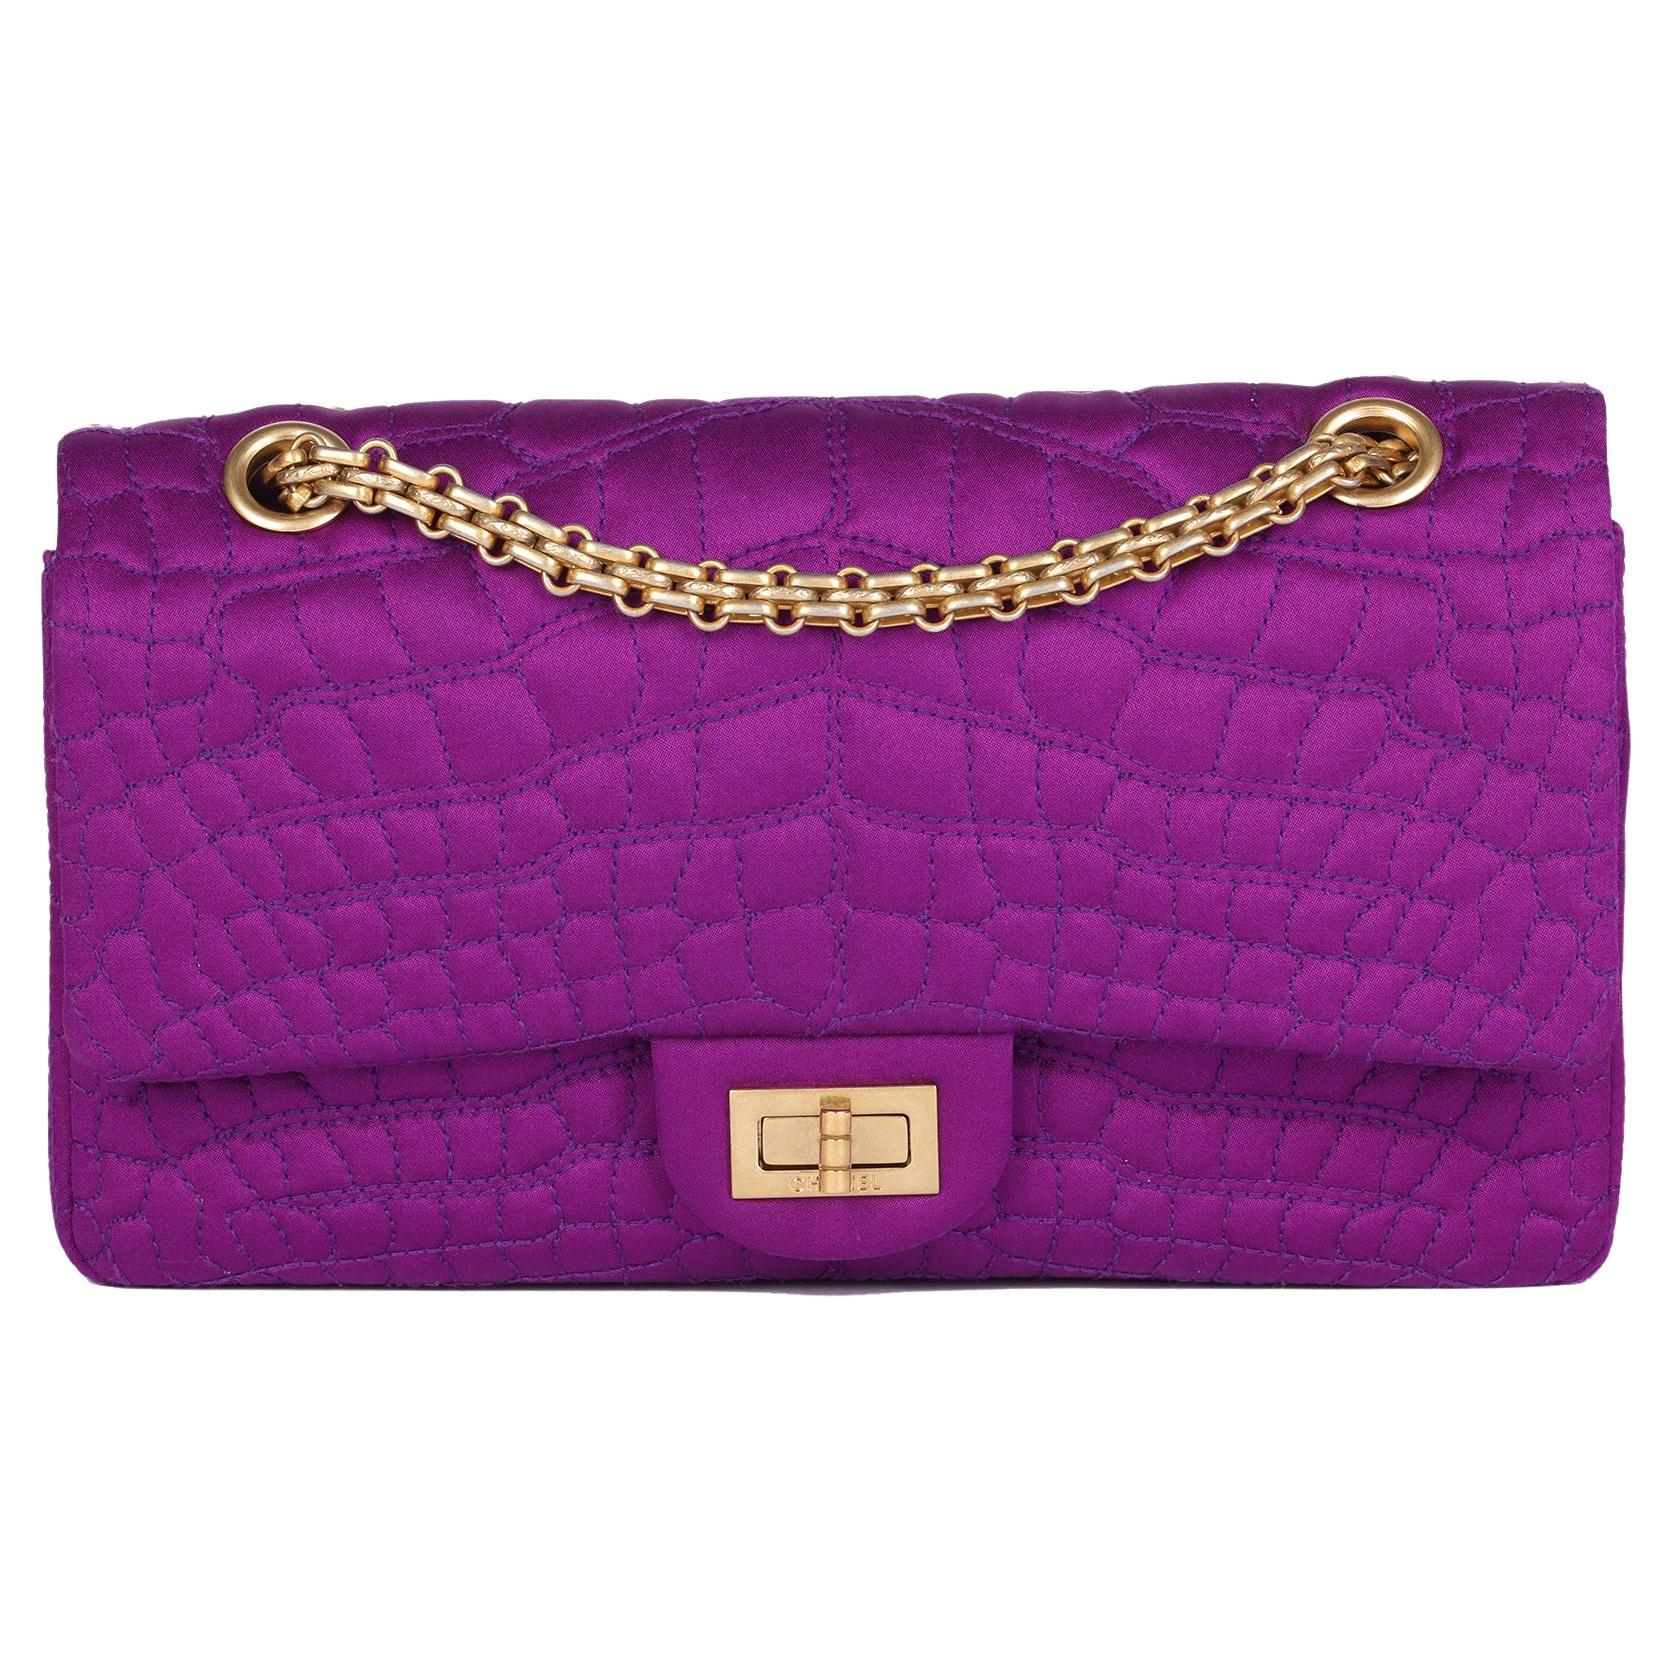 CHANEL Purple Crocodile Embroidered Satin 2.55 224 Reissue Double Flap Bag